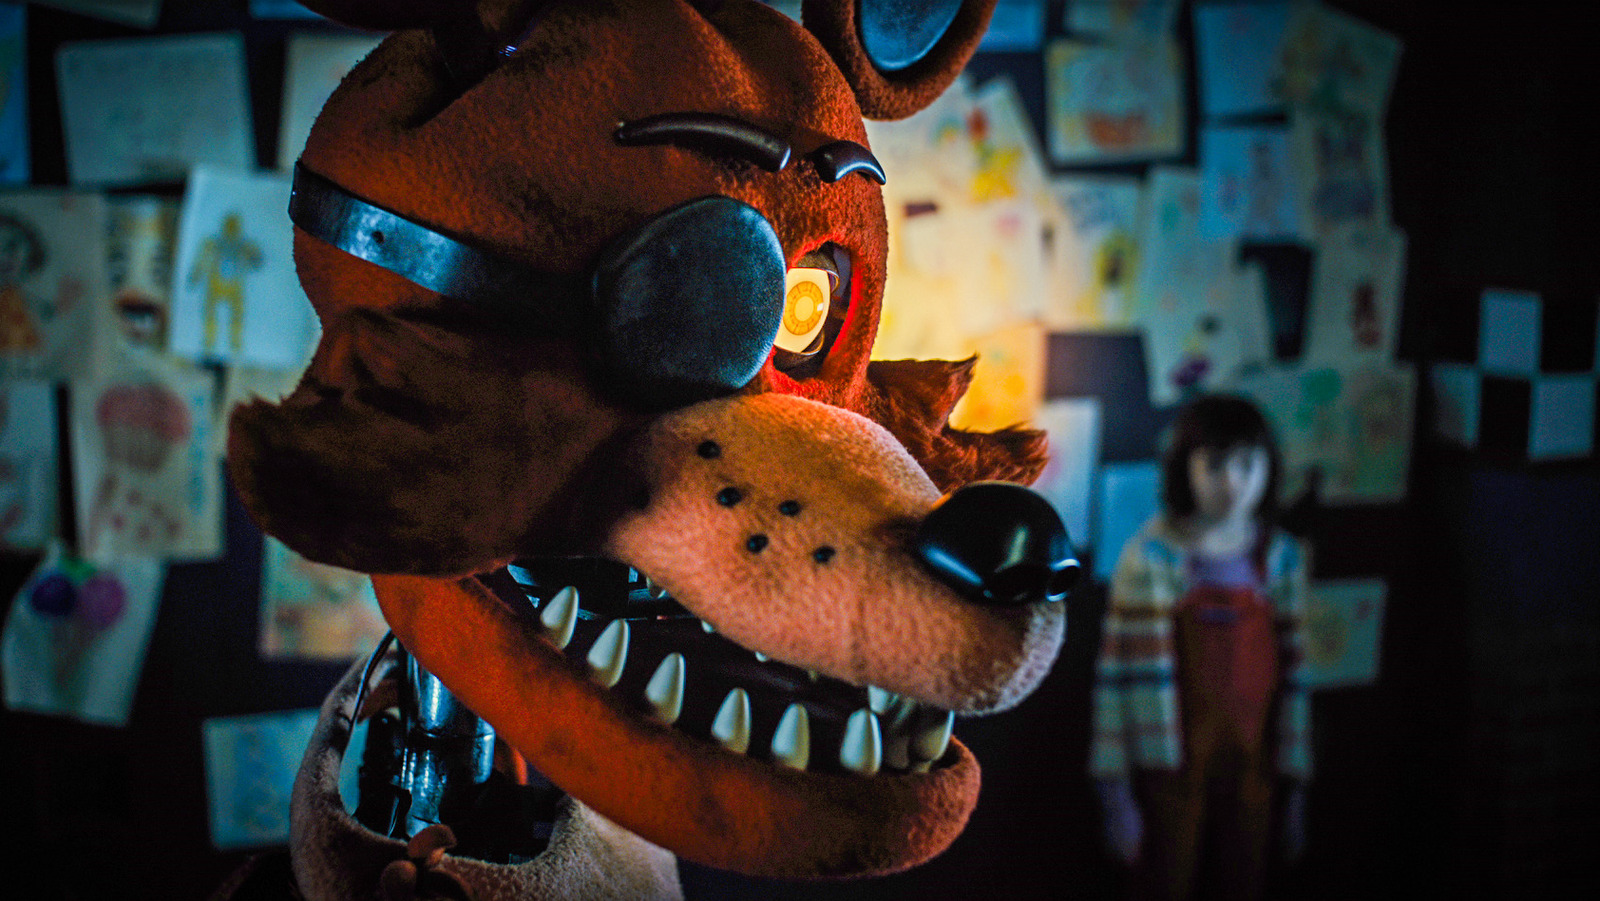 Five Nights at Freddy's' Sees Sharp Box Office Drop on 'Dune'-Free Weekend